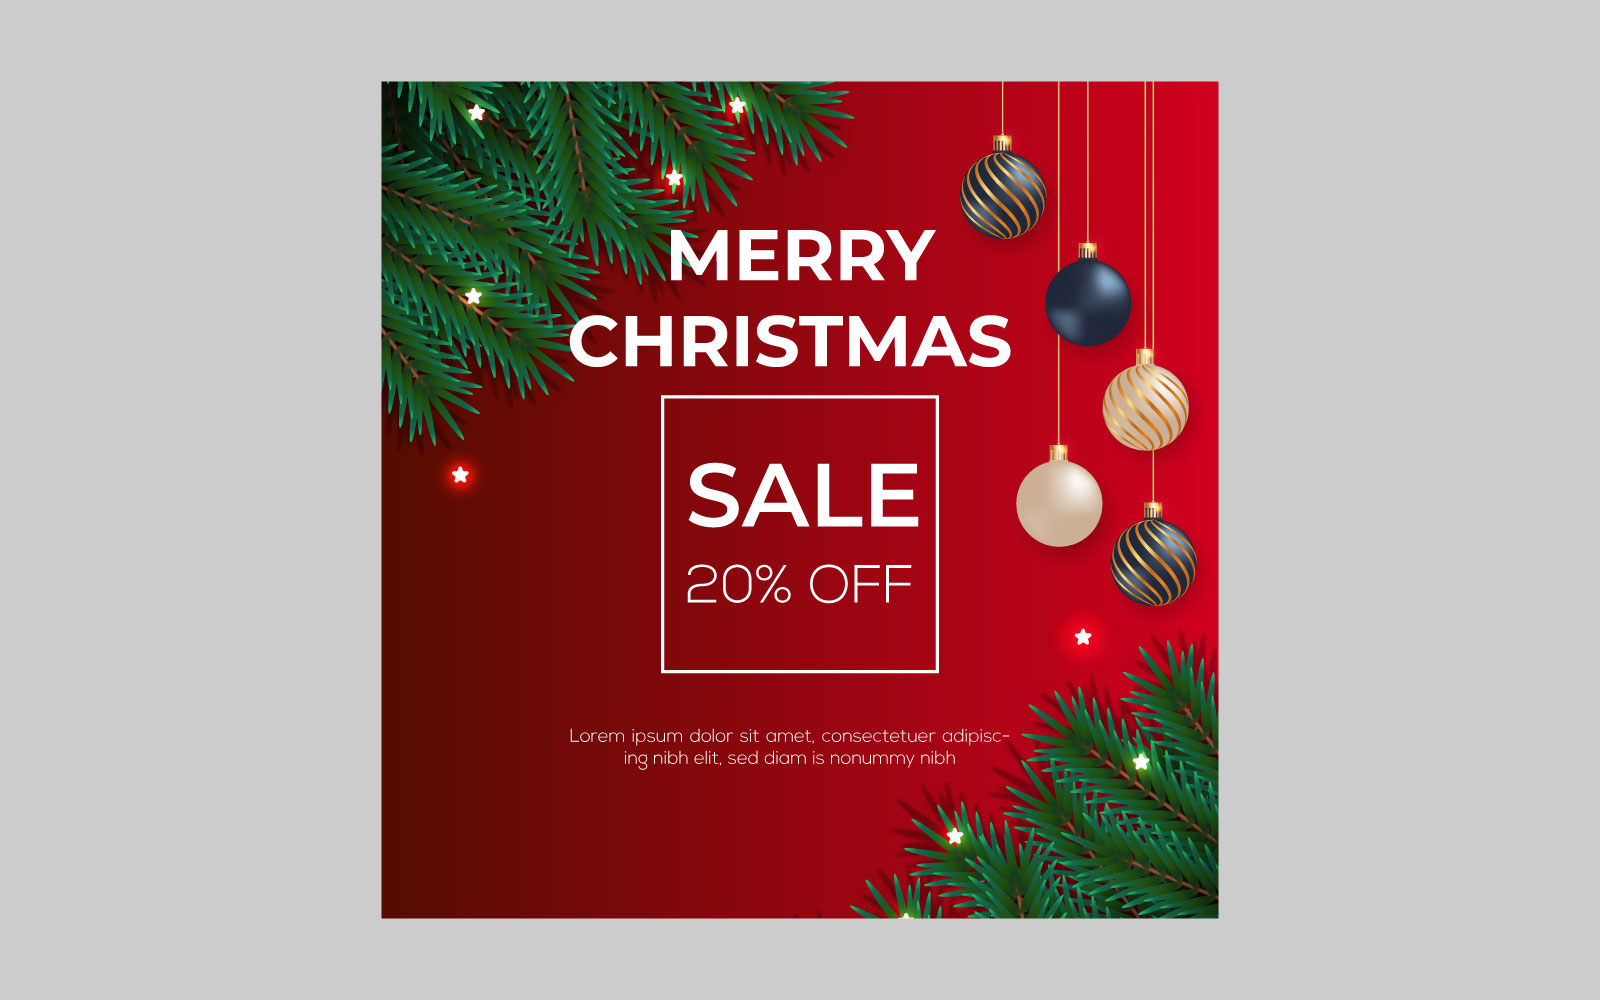 Merry Christmas sale post social media post decoration style